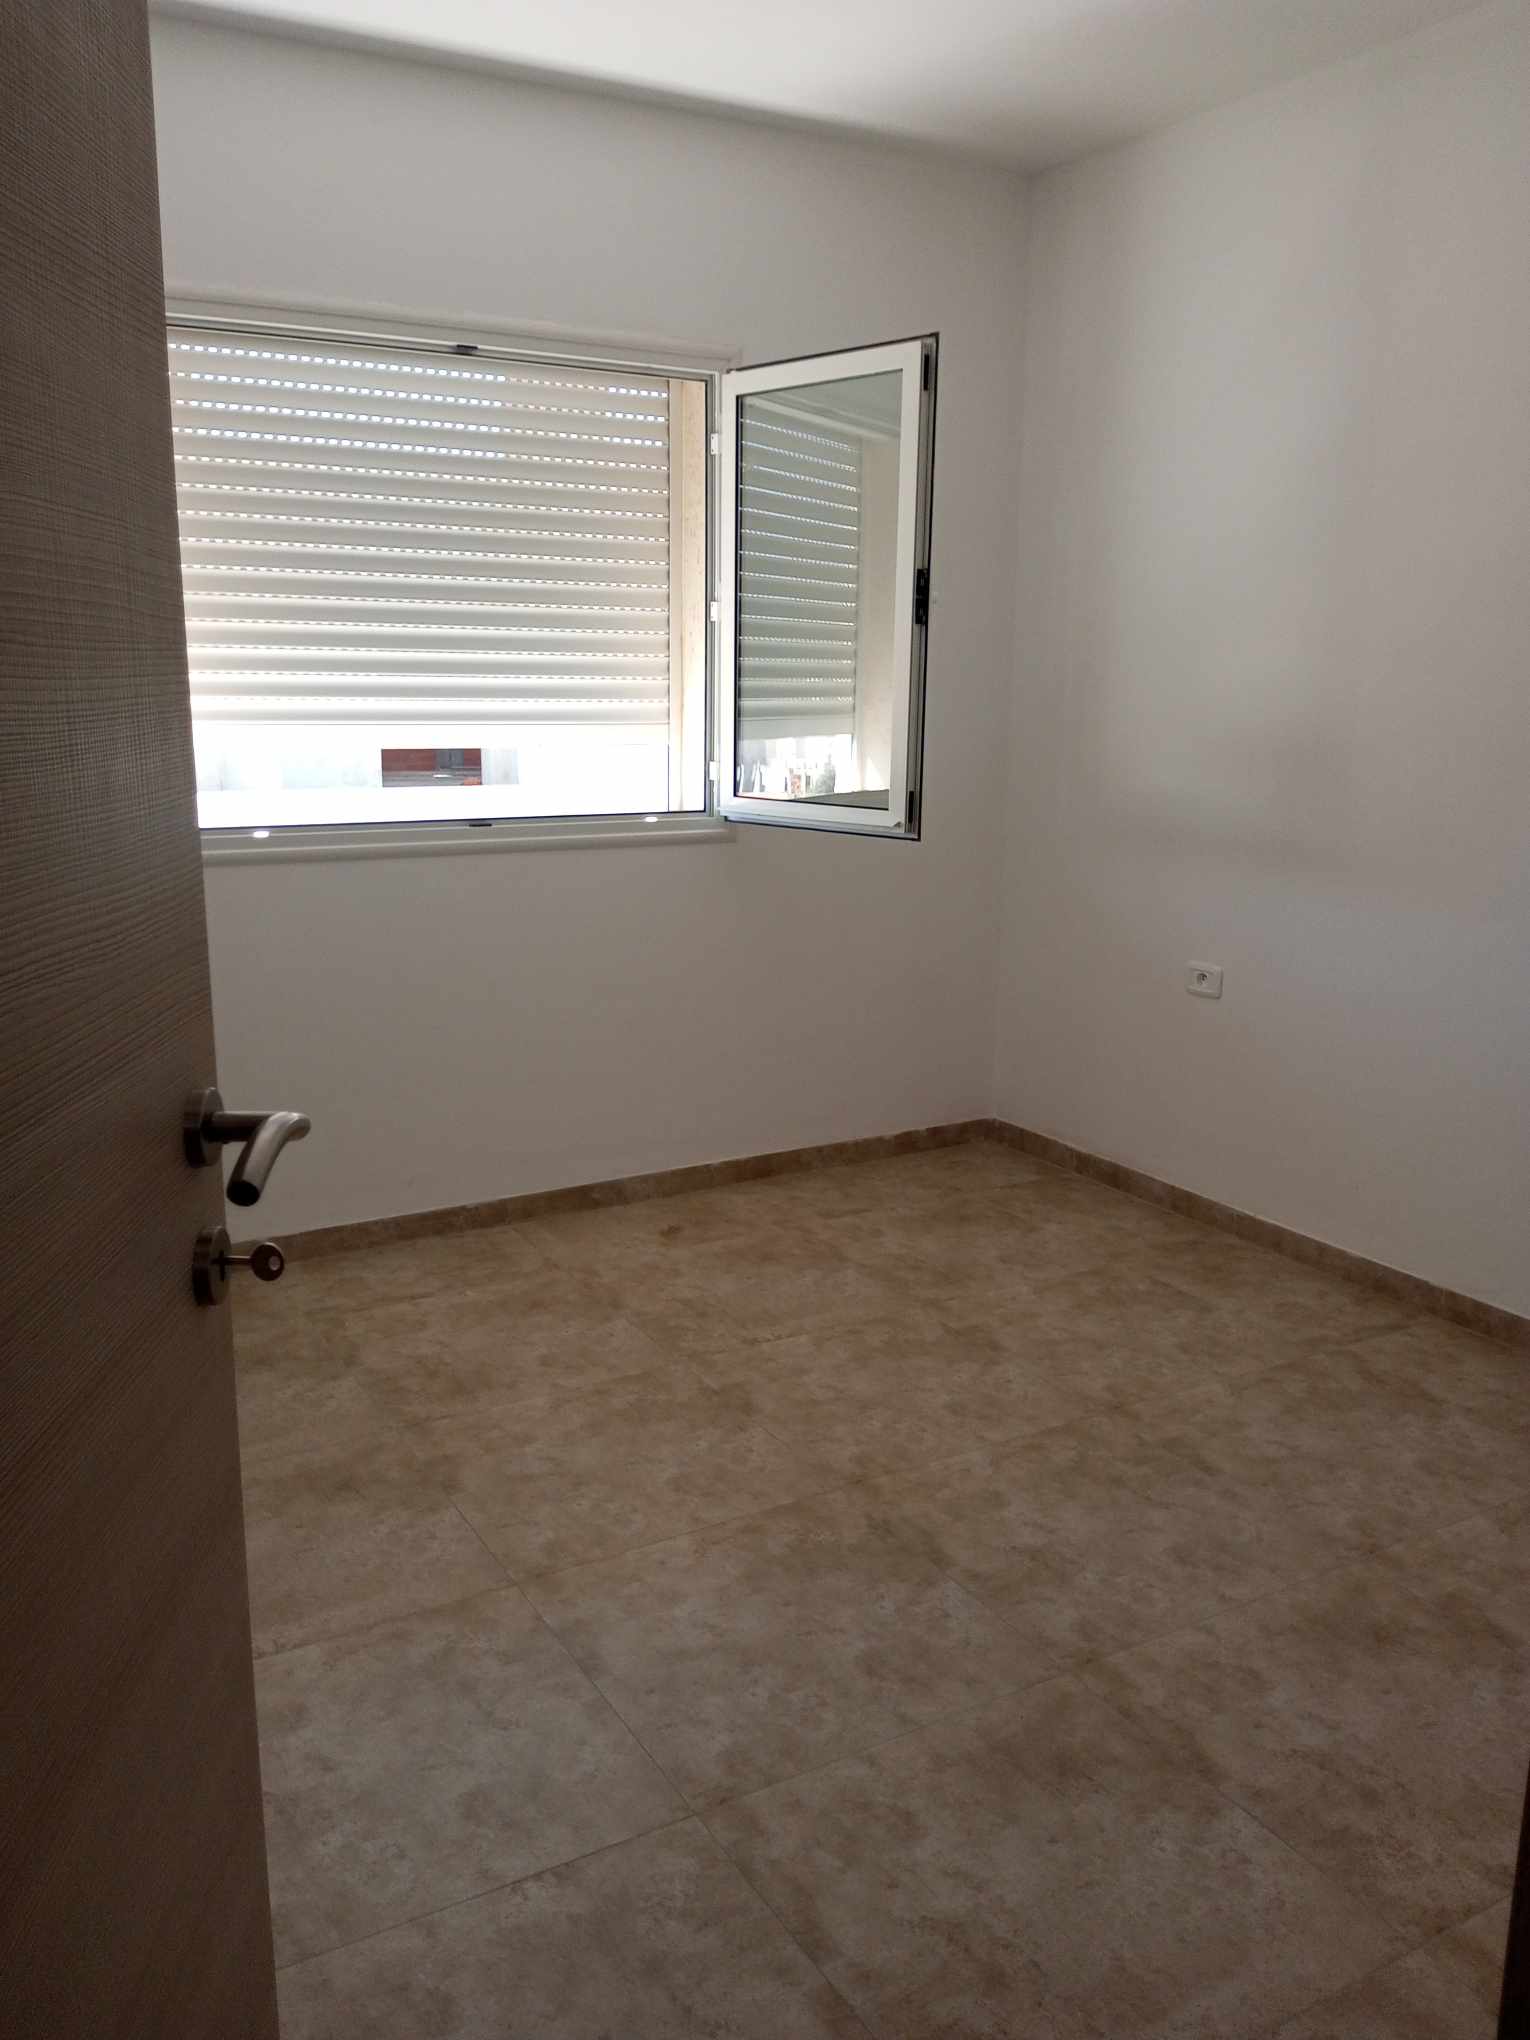 Fouchana Cite El Hidhab Location Appart. 1 pice Appartement s1